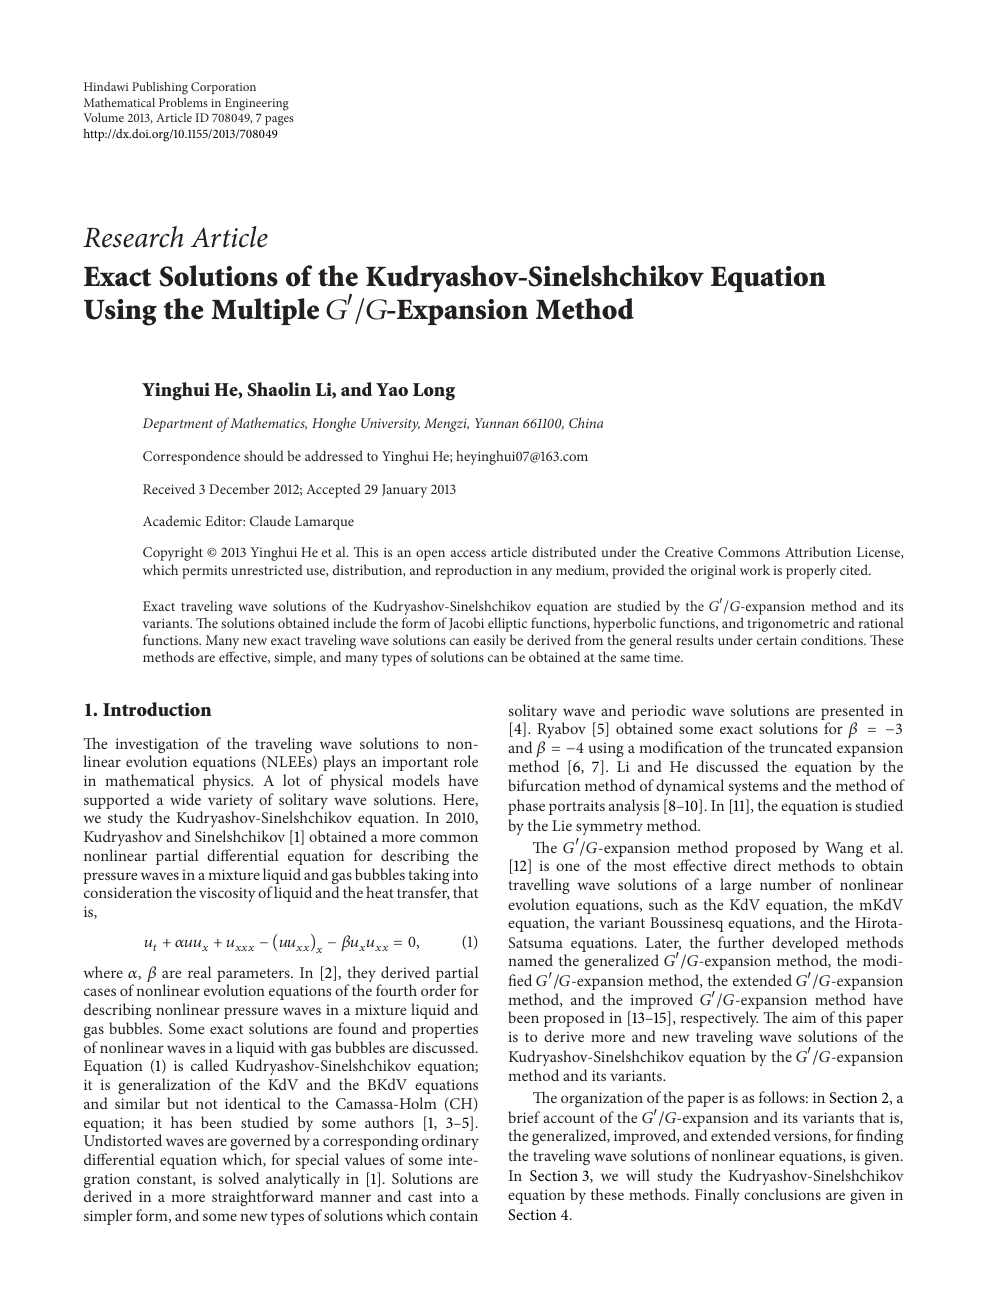 Exact Solutions Of The Kudryashov Sinelshchikov Equation Using The Multiple Expansion Method Topic Of Research Paper In Mathematics Download Scholarly Article Pdf And Read For Free On Cyberleninka Open Science Hub